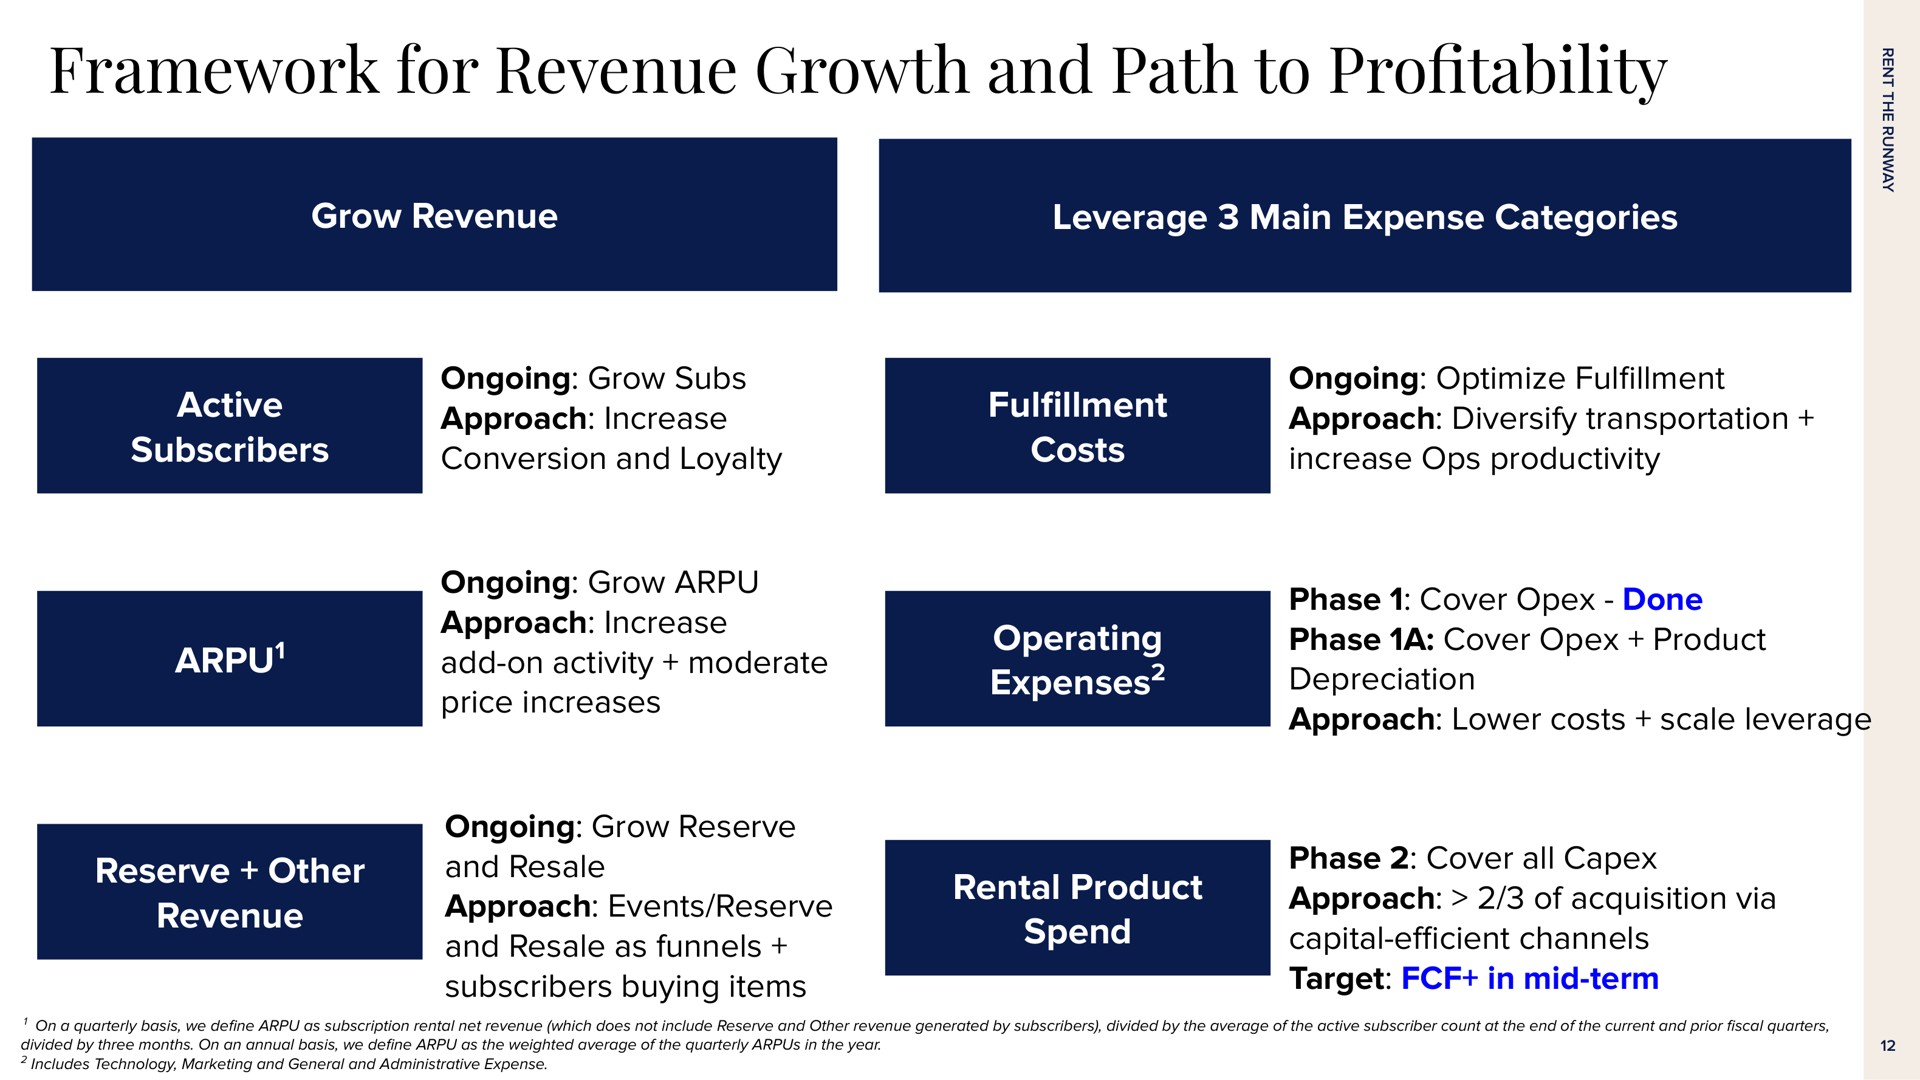 framework for revenue growth and path to pro grow revenue leverage main expense categories active subscribers ongoing grow subs approach increase conversion and loyalty costs ongoing optimize approach diversify transportation increase productivity ongoing grow approach increase add on activity moderate price increases operating expenses phase cover done phase a cover product depreciation approach lower costs scale leverage reserve other revenue ongoing grow reserve and resale approach events reserve and resale as funnels subscribers buying items rental product spend phase cover all approach of acquisition via capital channels target in mid term profitability eyes | Rent The Runway